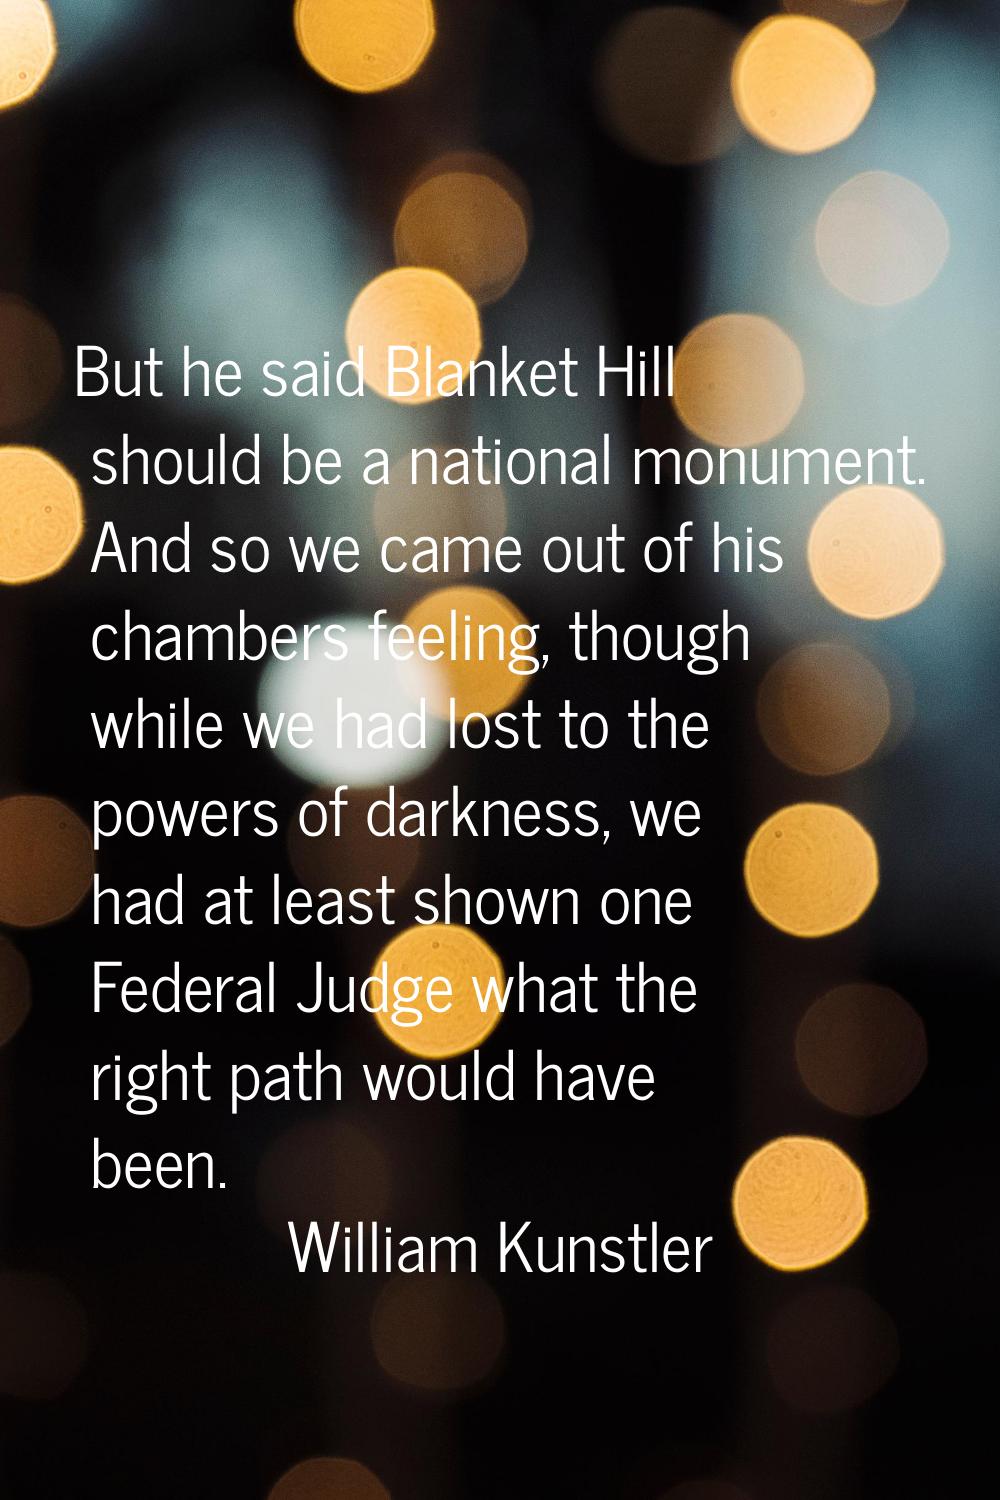 But he said Blanket Hill should be a national monument. And so we came out of his chambers feeling,